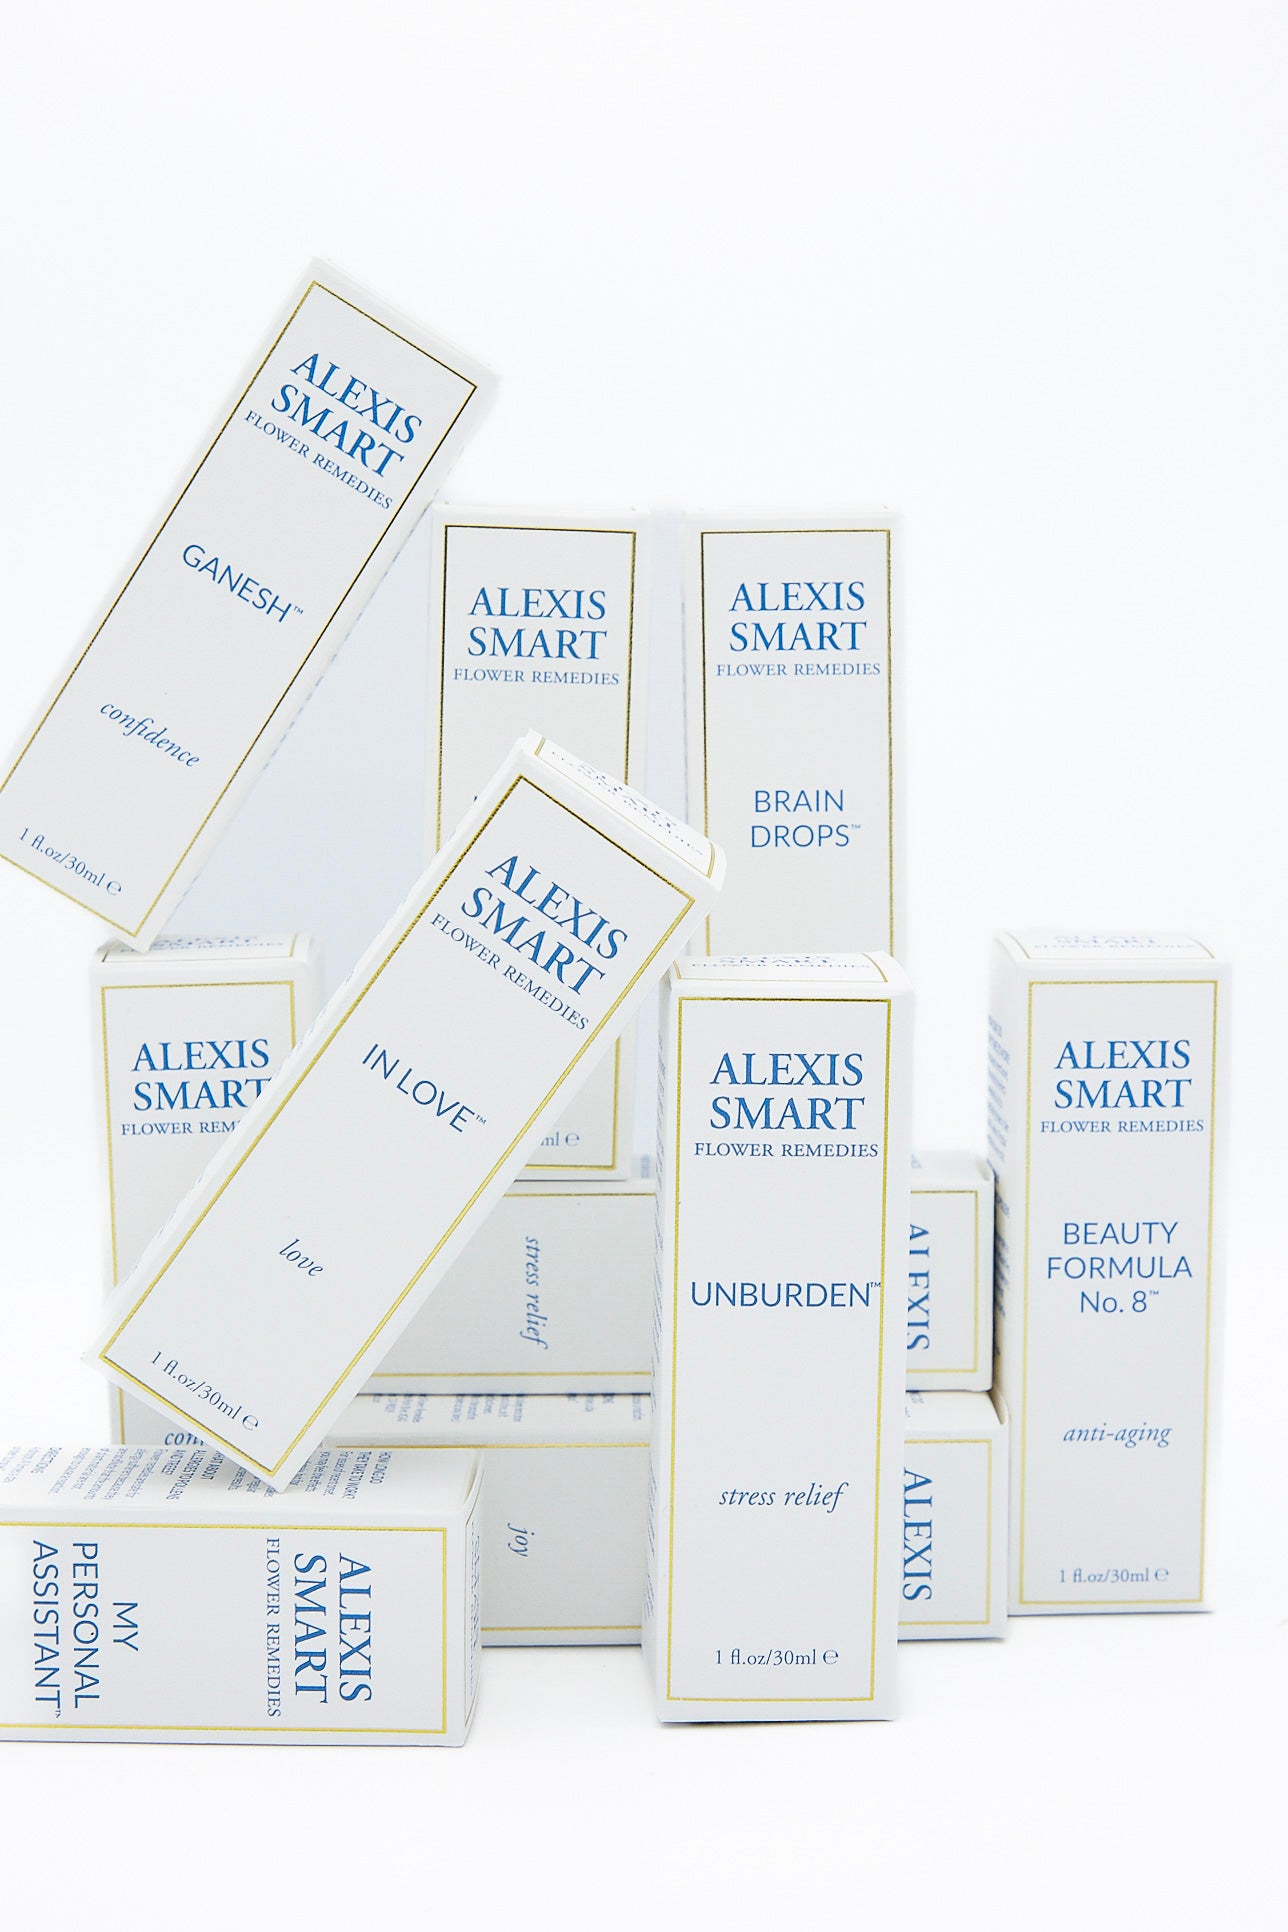 A stack of boxes showcasing Flower Remedies - In Love by Alexis Smart.